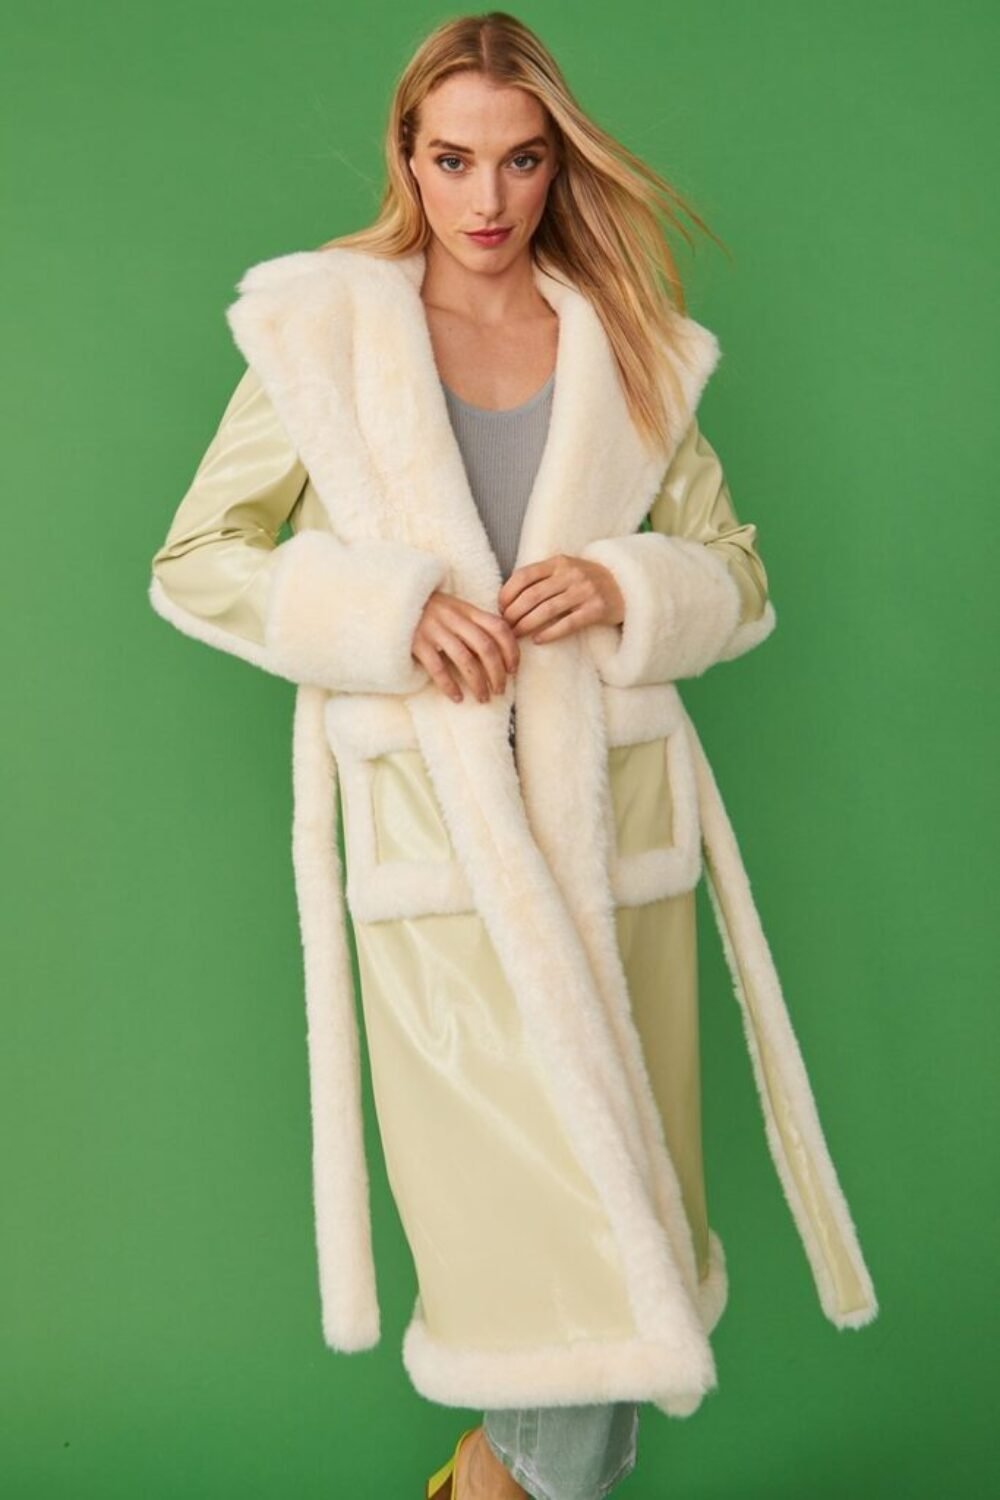 Shop Lux Apple Green Faux Fur and Faux Suede Trench Coat and women's luxury and designer clothes at www.lux-apparel.co.uk